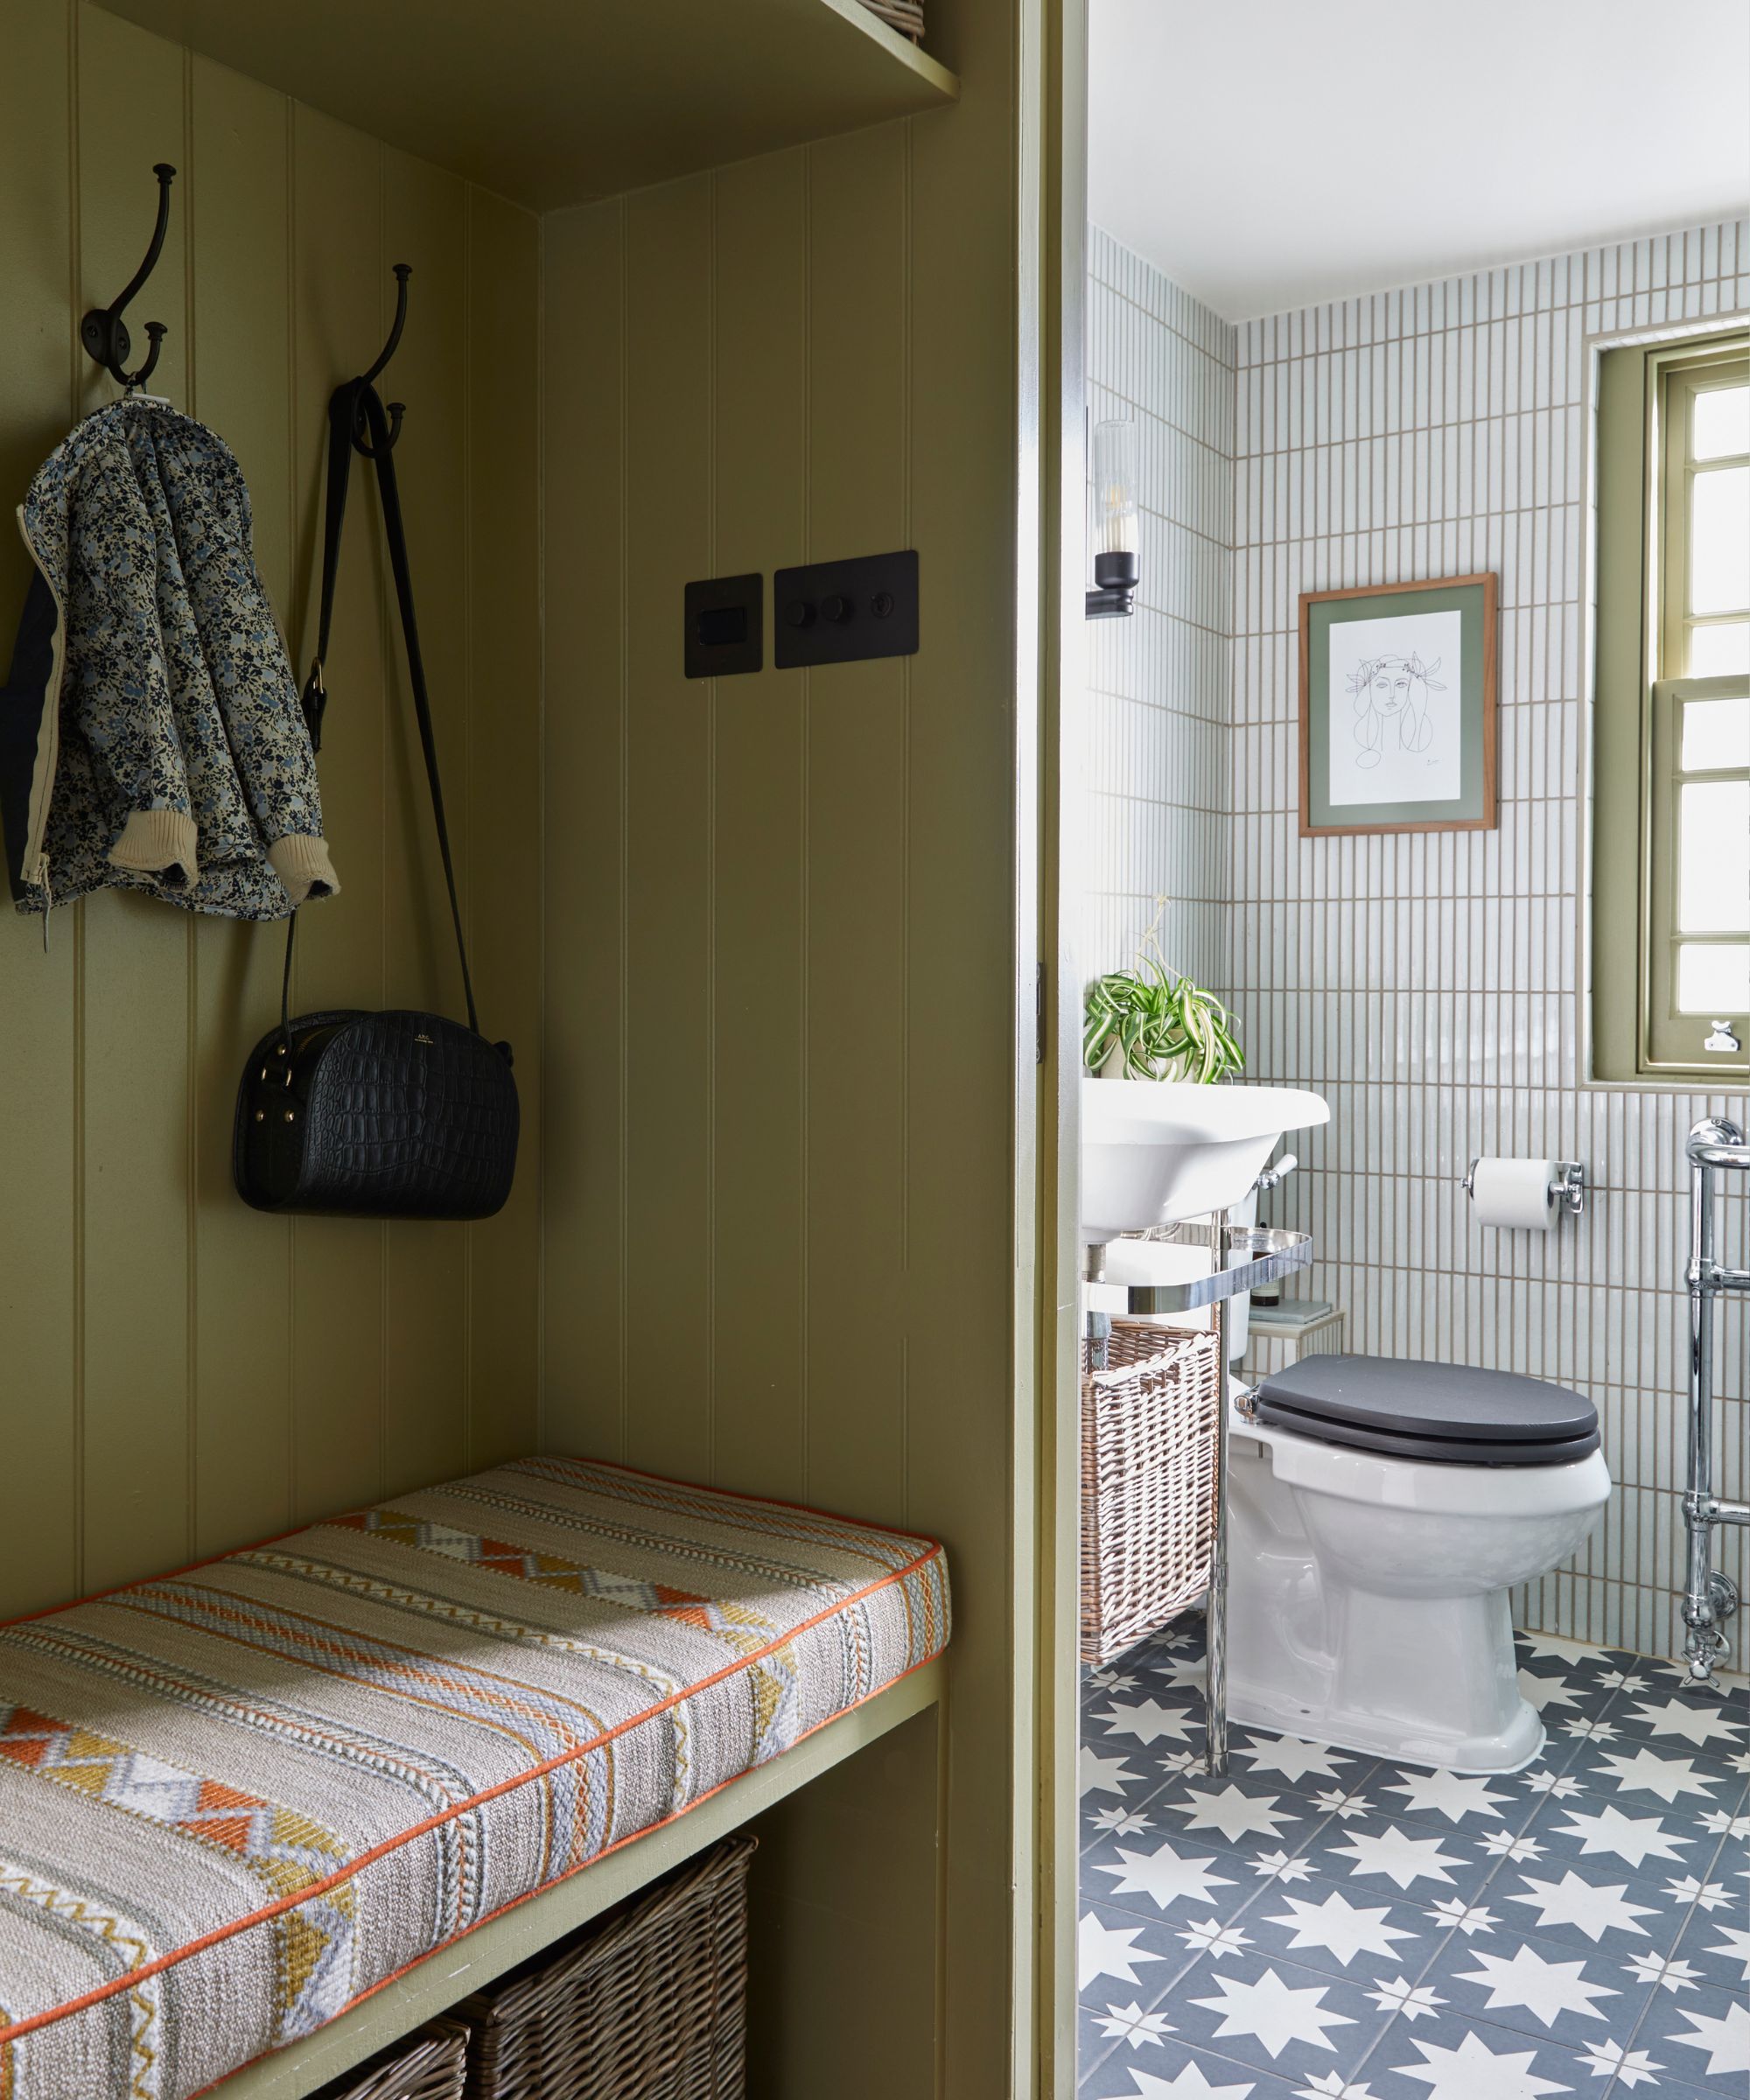 A bathroom with blue patterned tile on the floor and white vertical tile on the walls, with a view from an olive green room